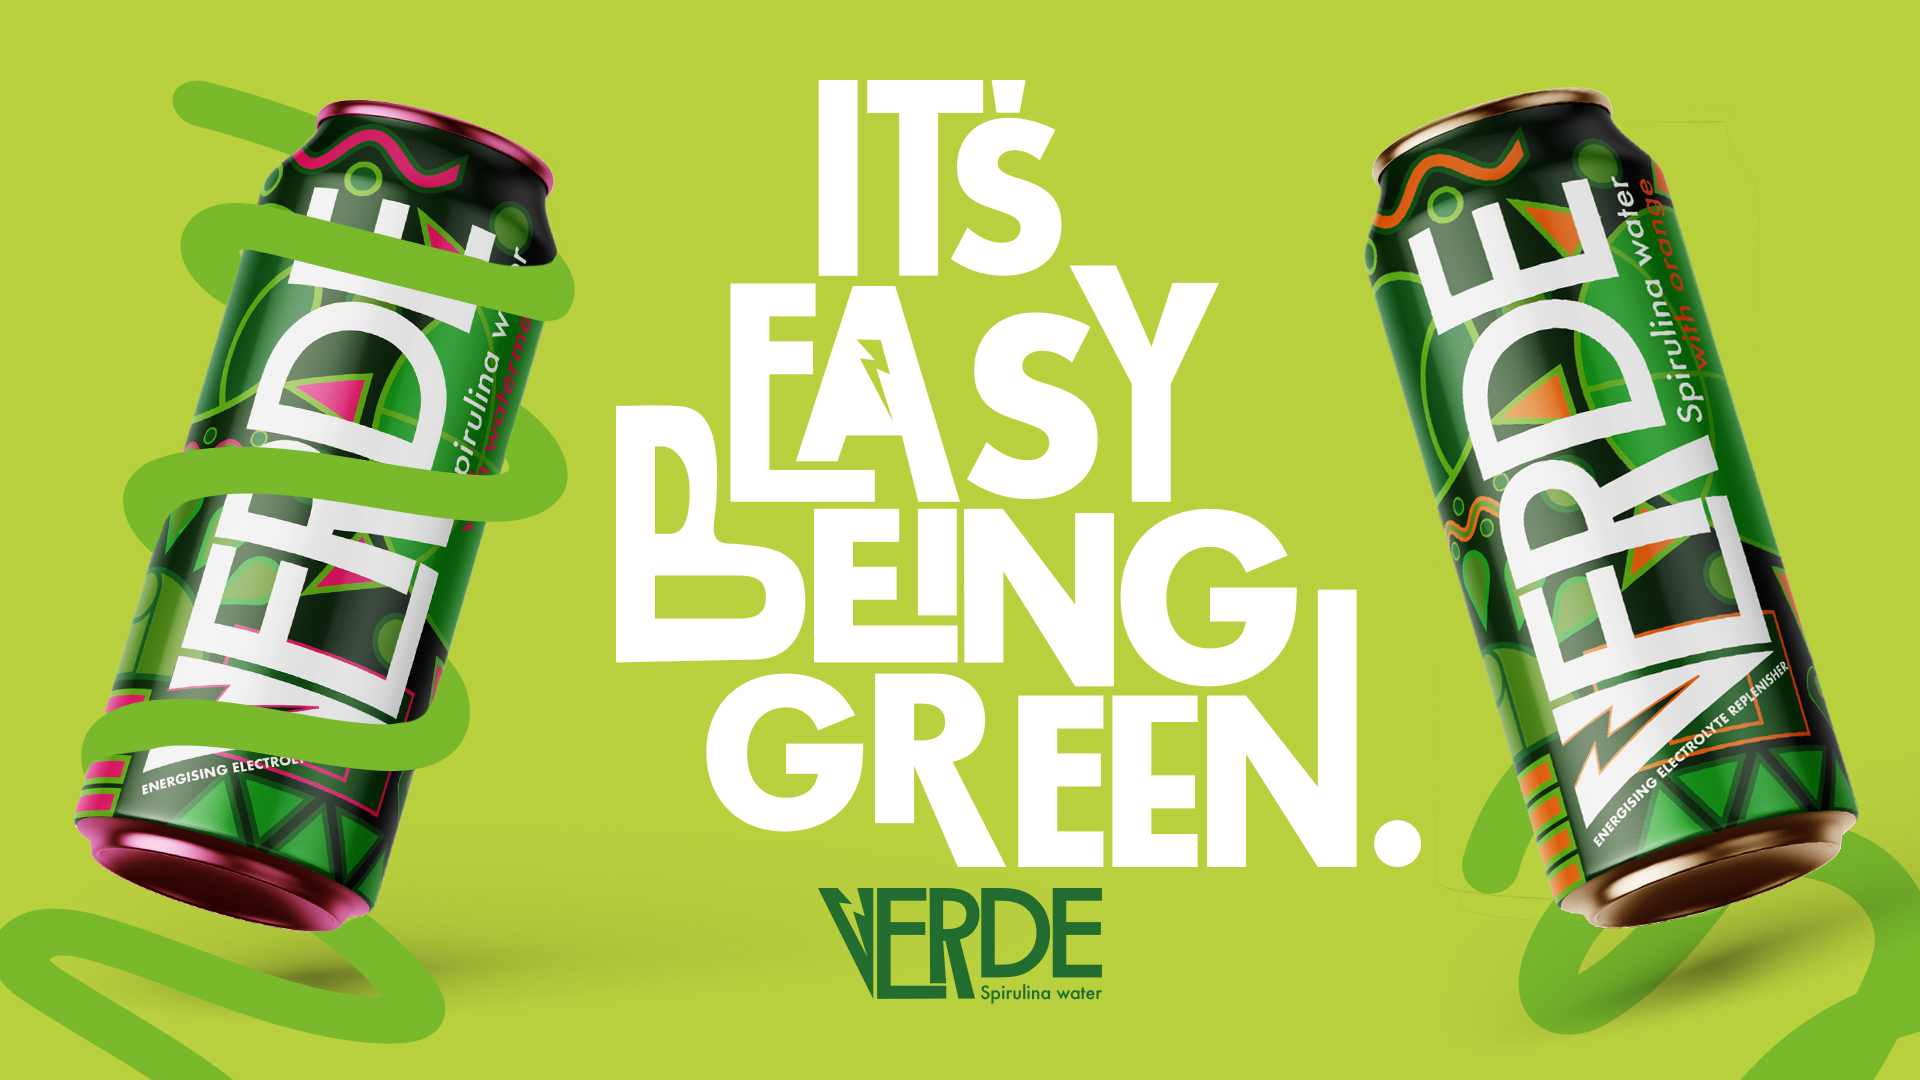 Graphic design work by Lois Brandon showing bright green drinks packaging mocked up onto two cans with type 'It's Easy Being Green' in centre with Verde logo below.